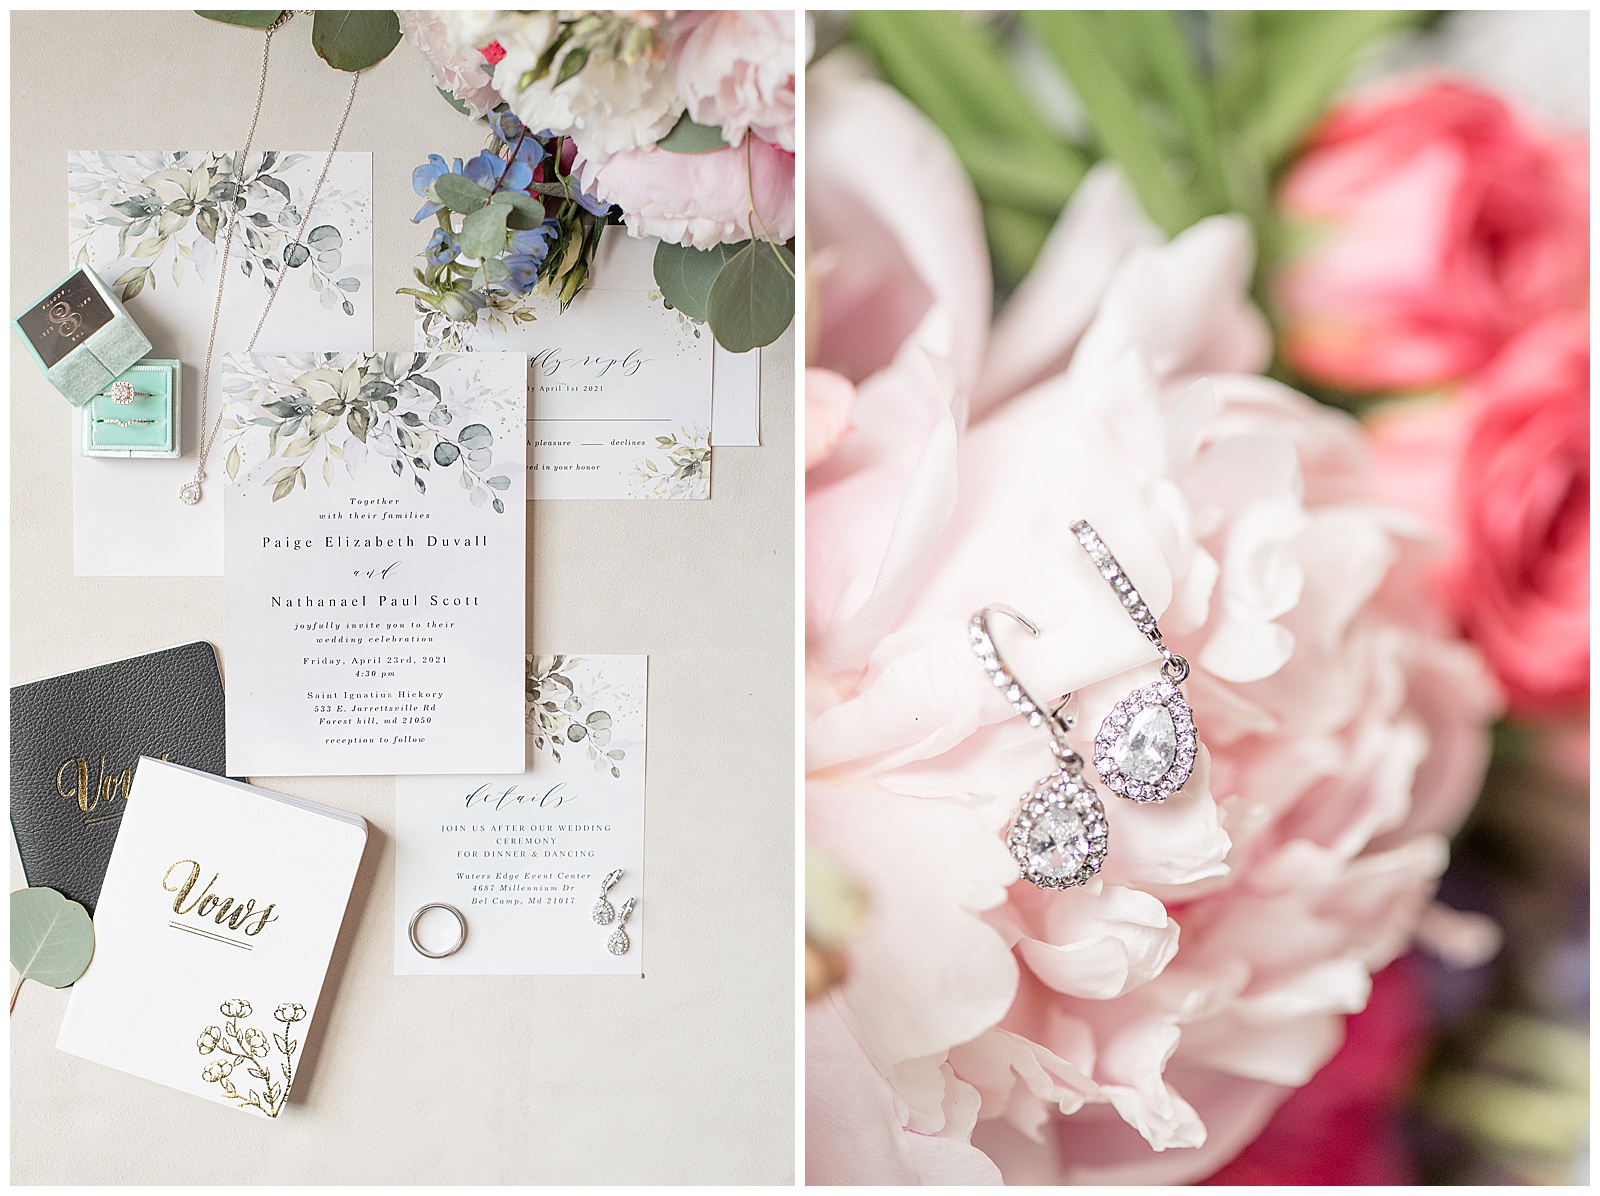 wedding invitation, rings, and diamond earrings on display and surrounded by beautiful spring flowers